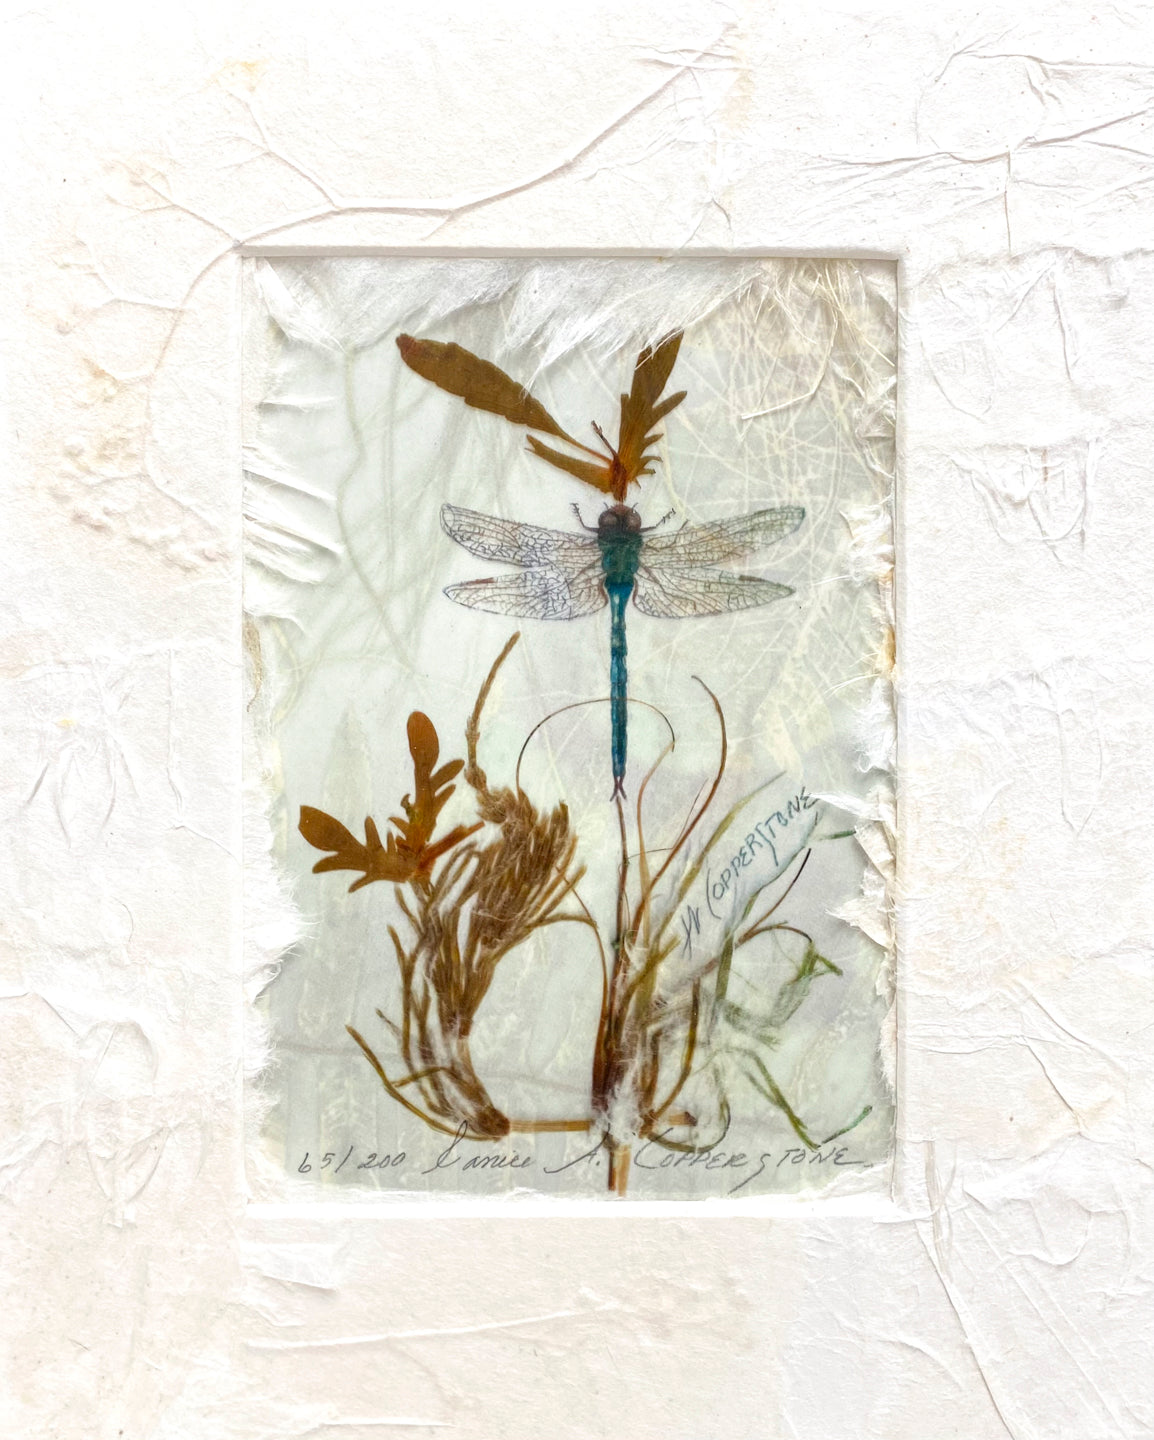 Dragonfly - Mixed media fine art print by Janice A. Copperstone of Milford, Mich.  